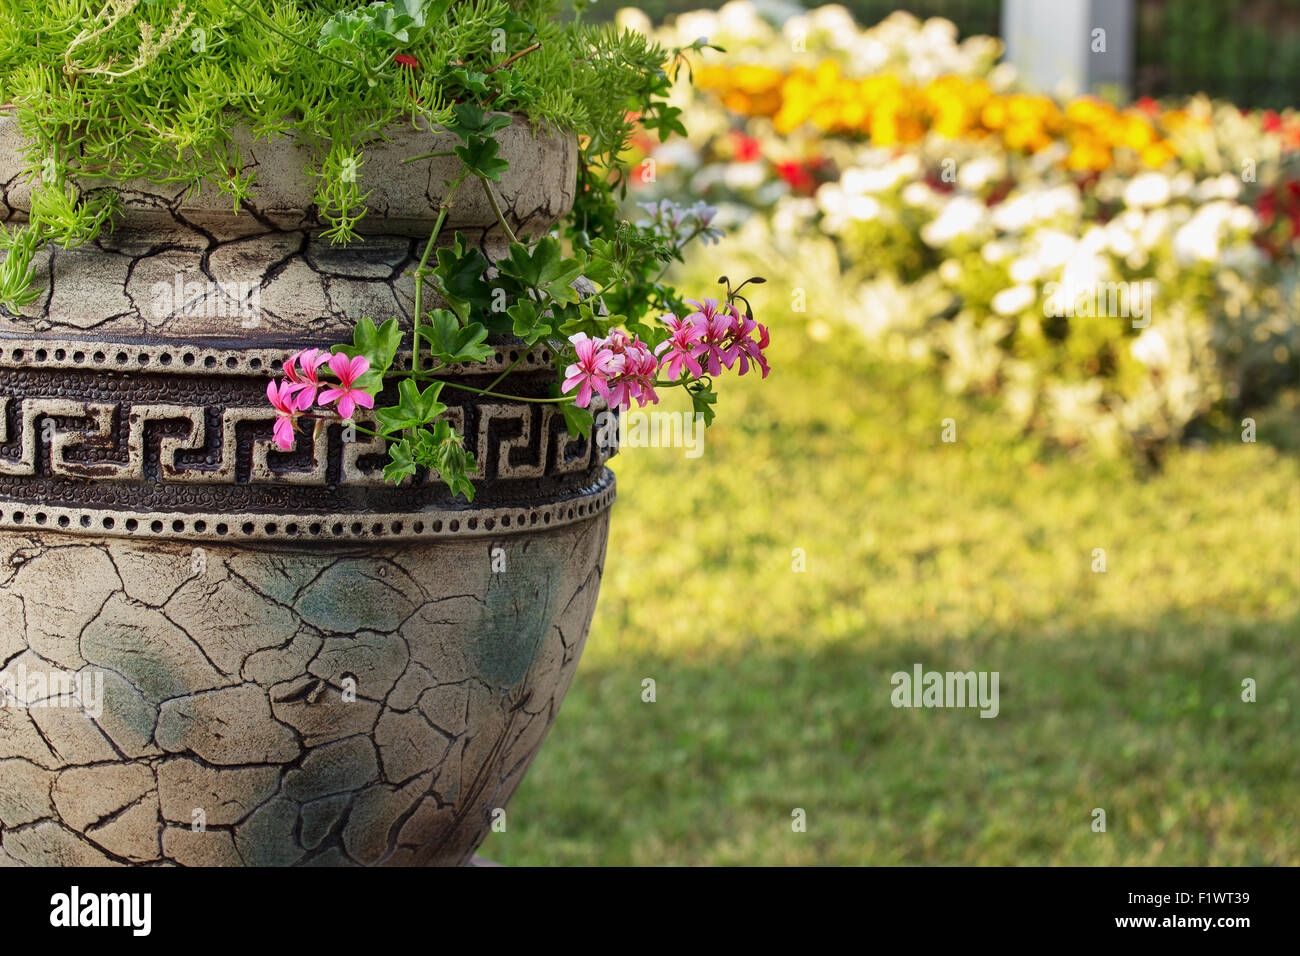 Greece vase with flowers on the natural background. Stock Photo